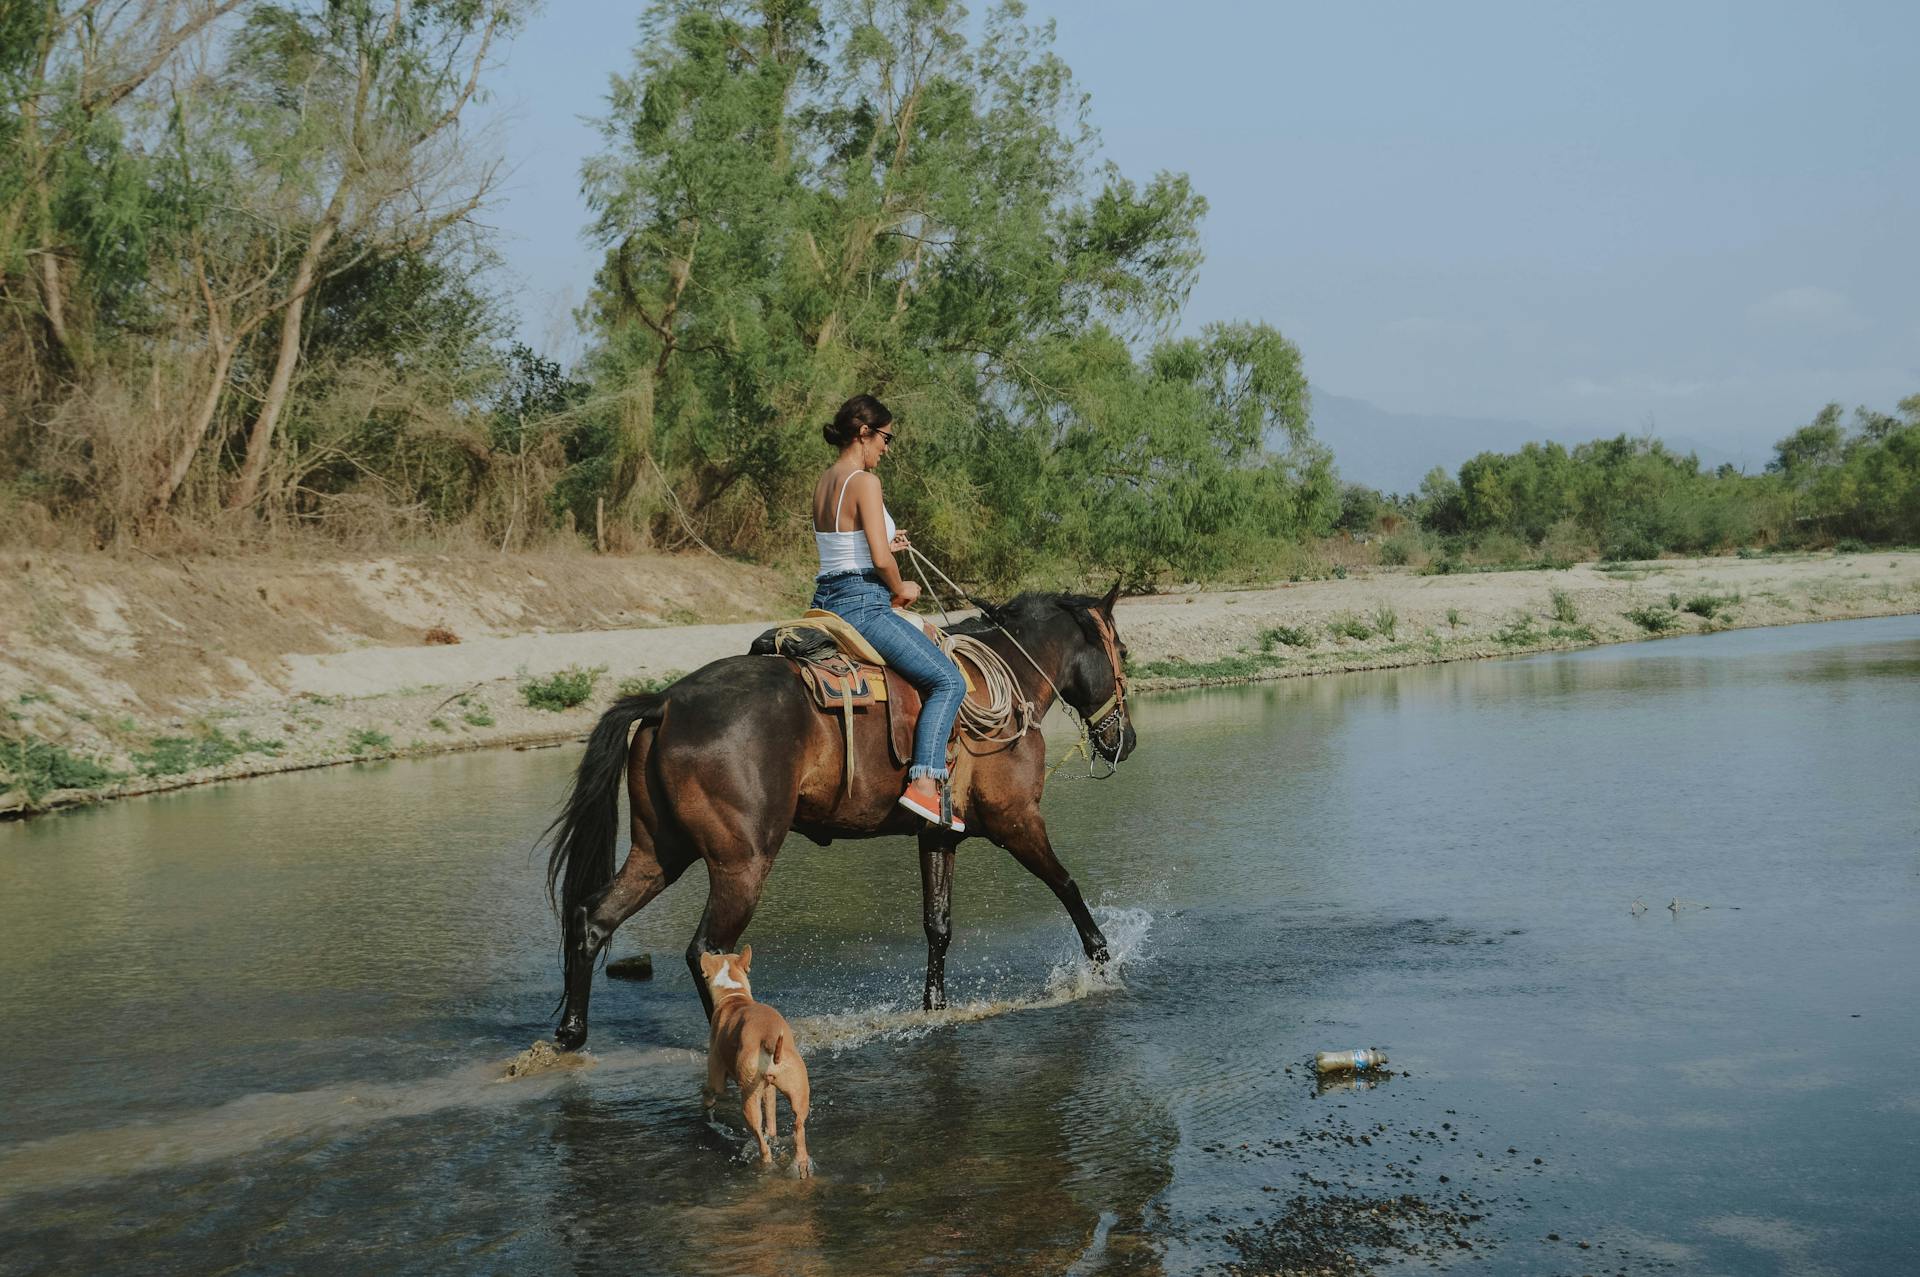 Getting Started with Horseback Riding